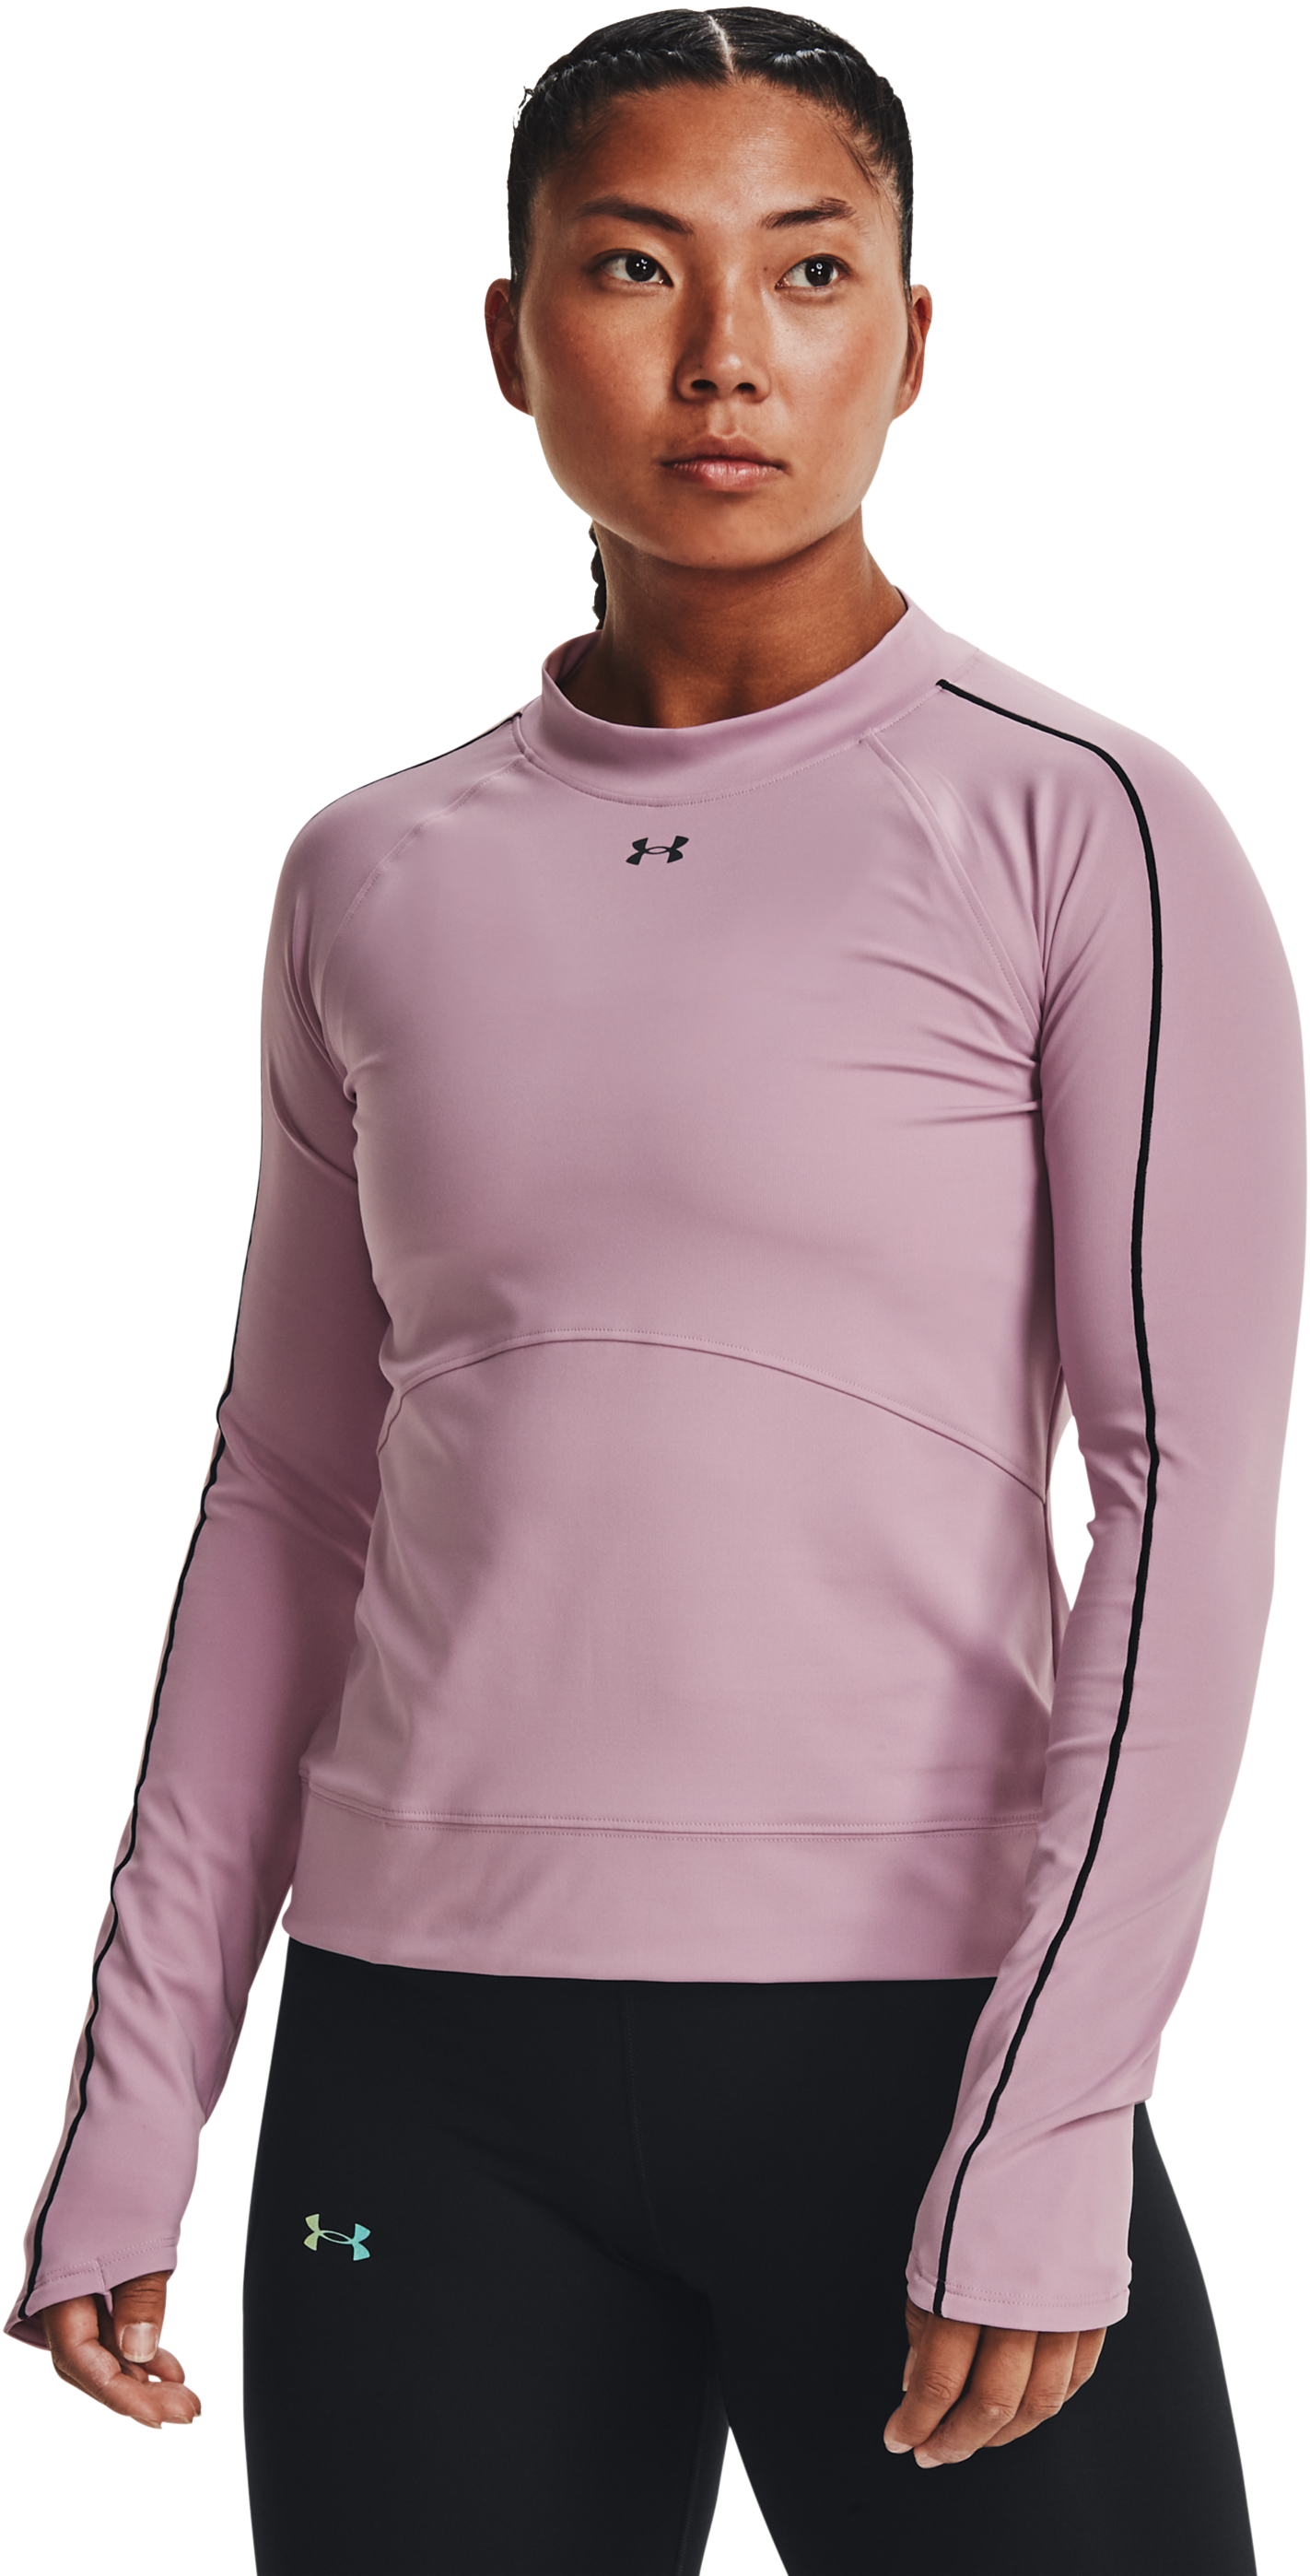 Under Armour RUSH ColdGear Long-Sleeve Core Top for Ladies